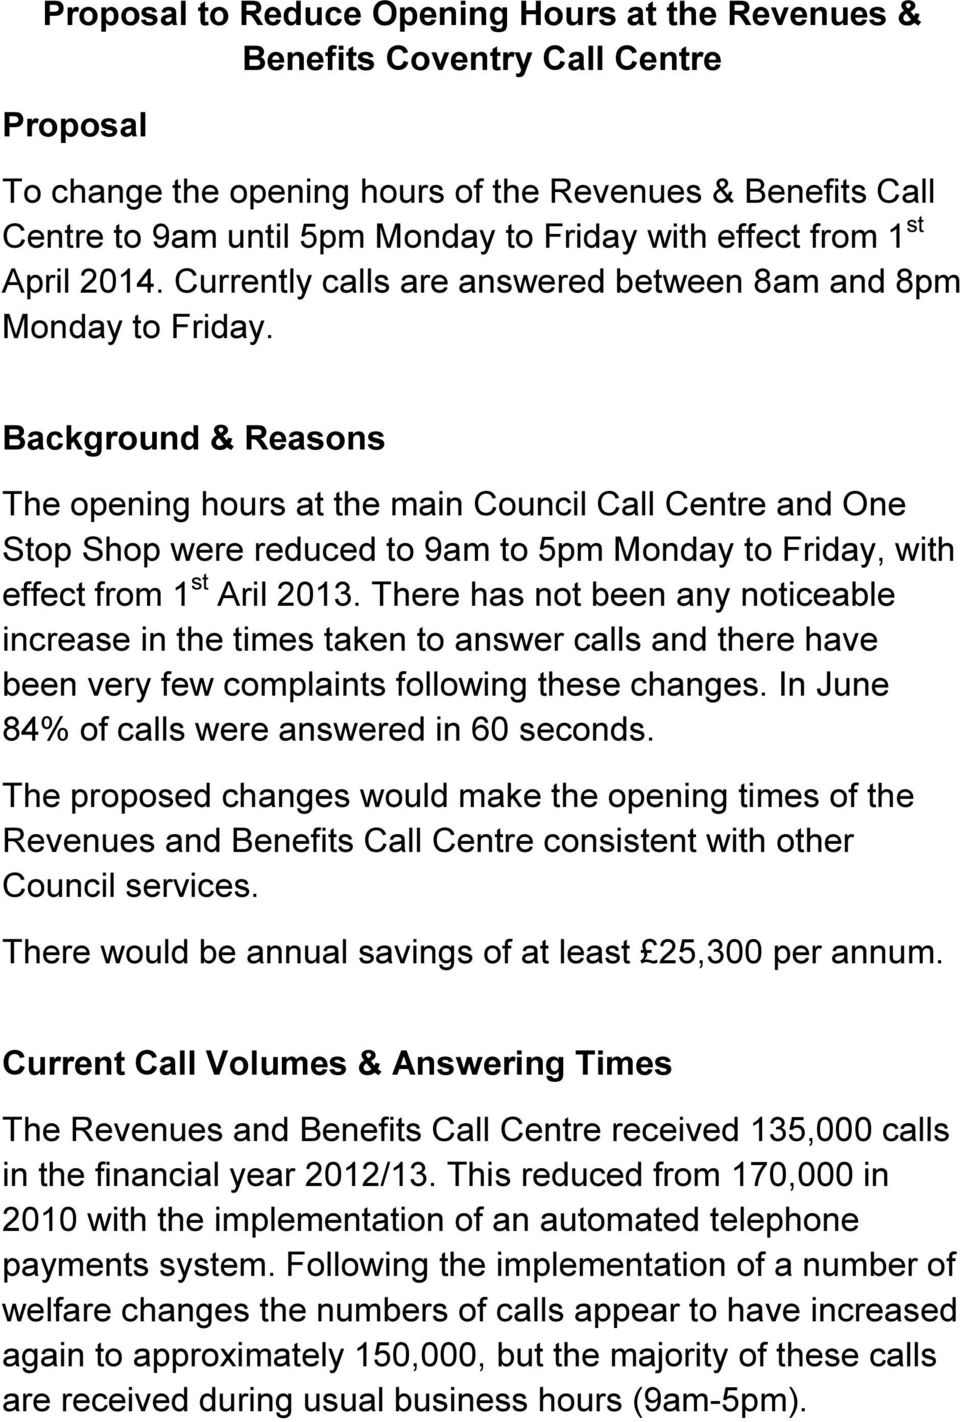 Background & Reasons The opening hours at the main Council Call Centre and One Stop Shop were reduced to 9am to 5pm Monday to Friday, with effect from 1 st Aril 2013.